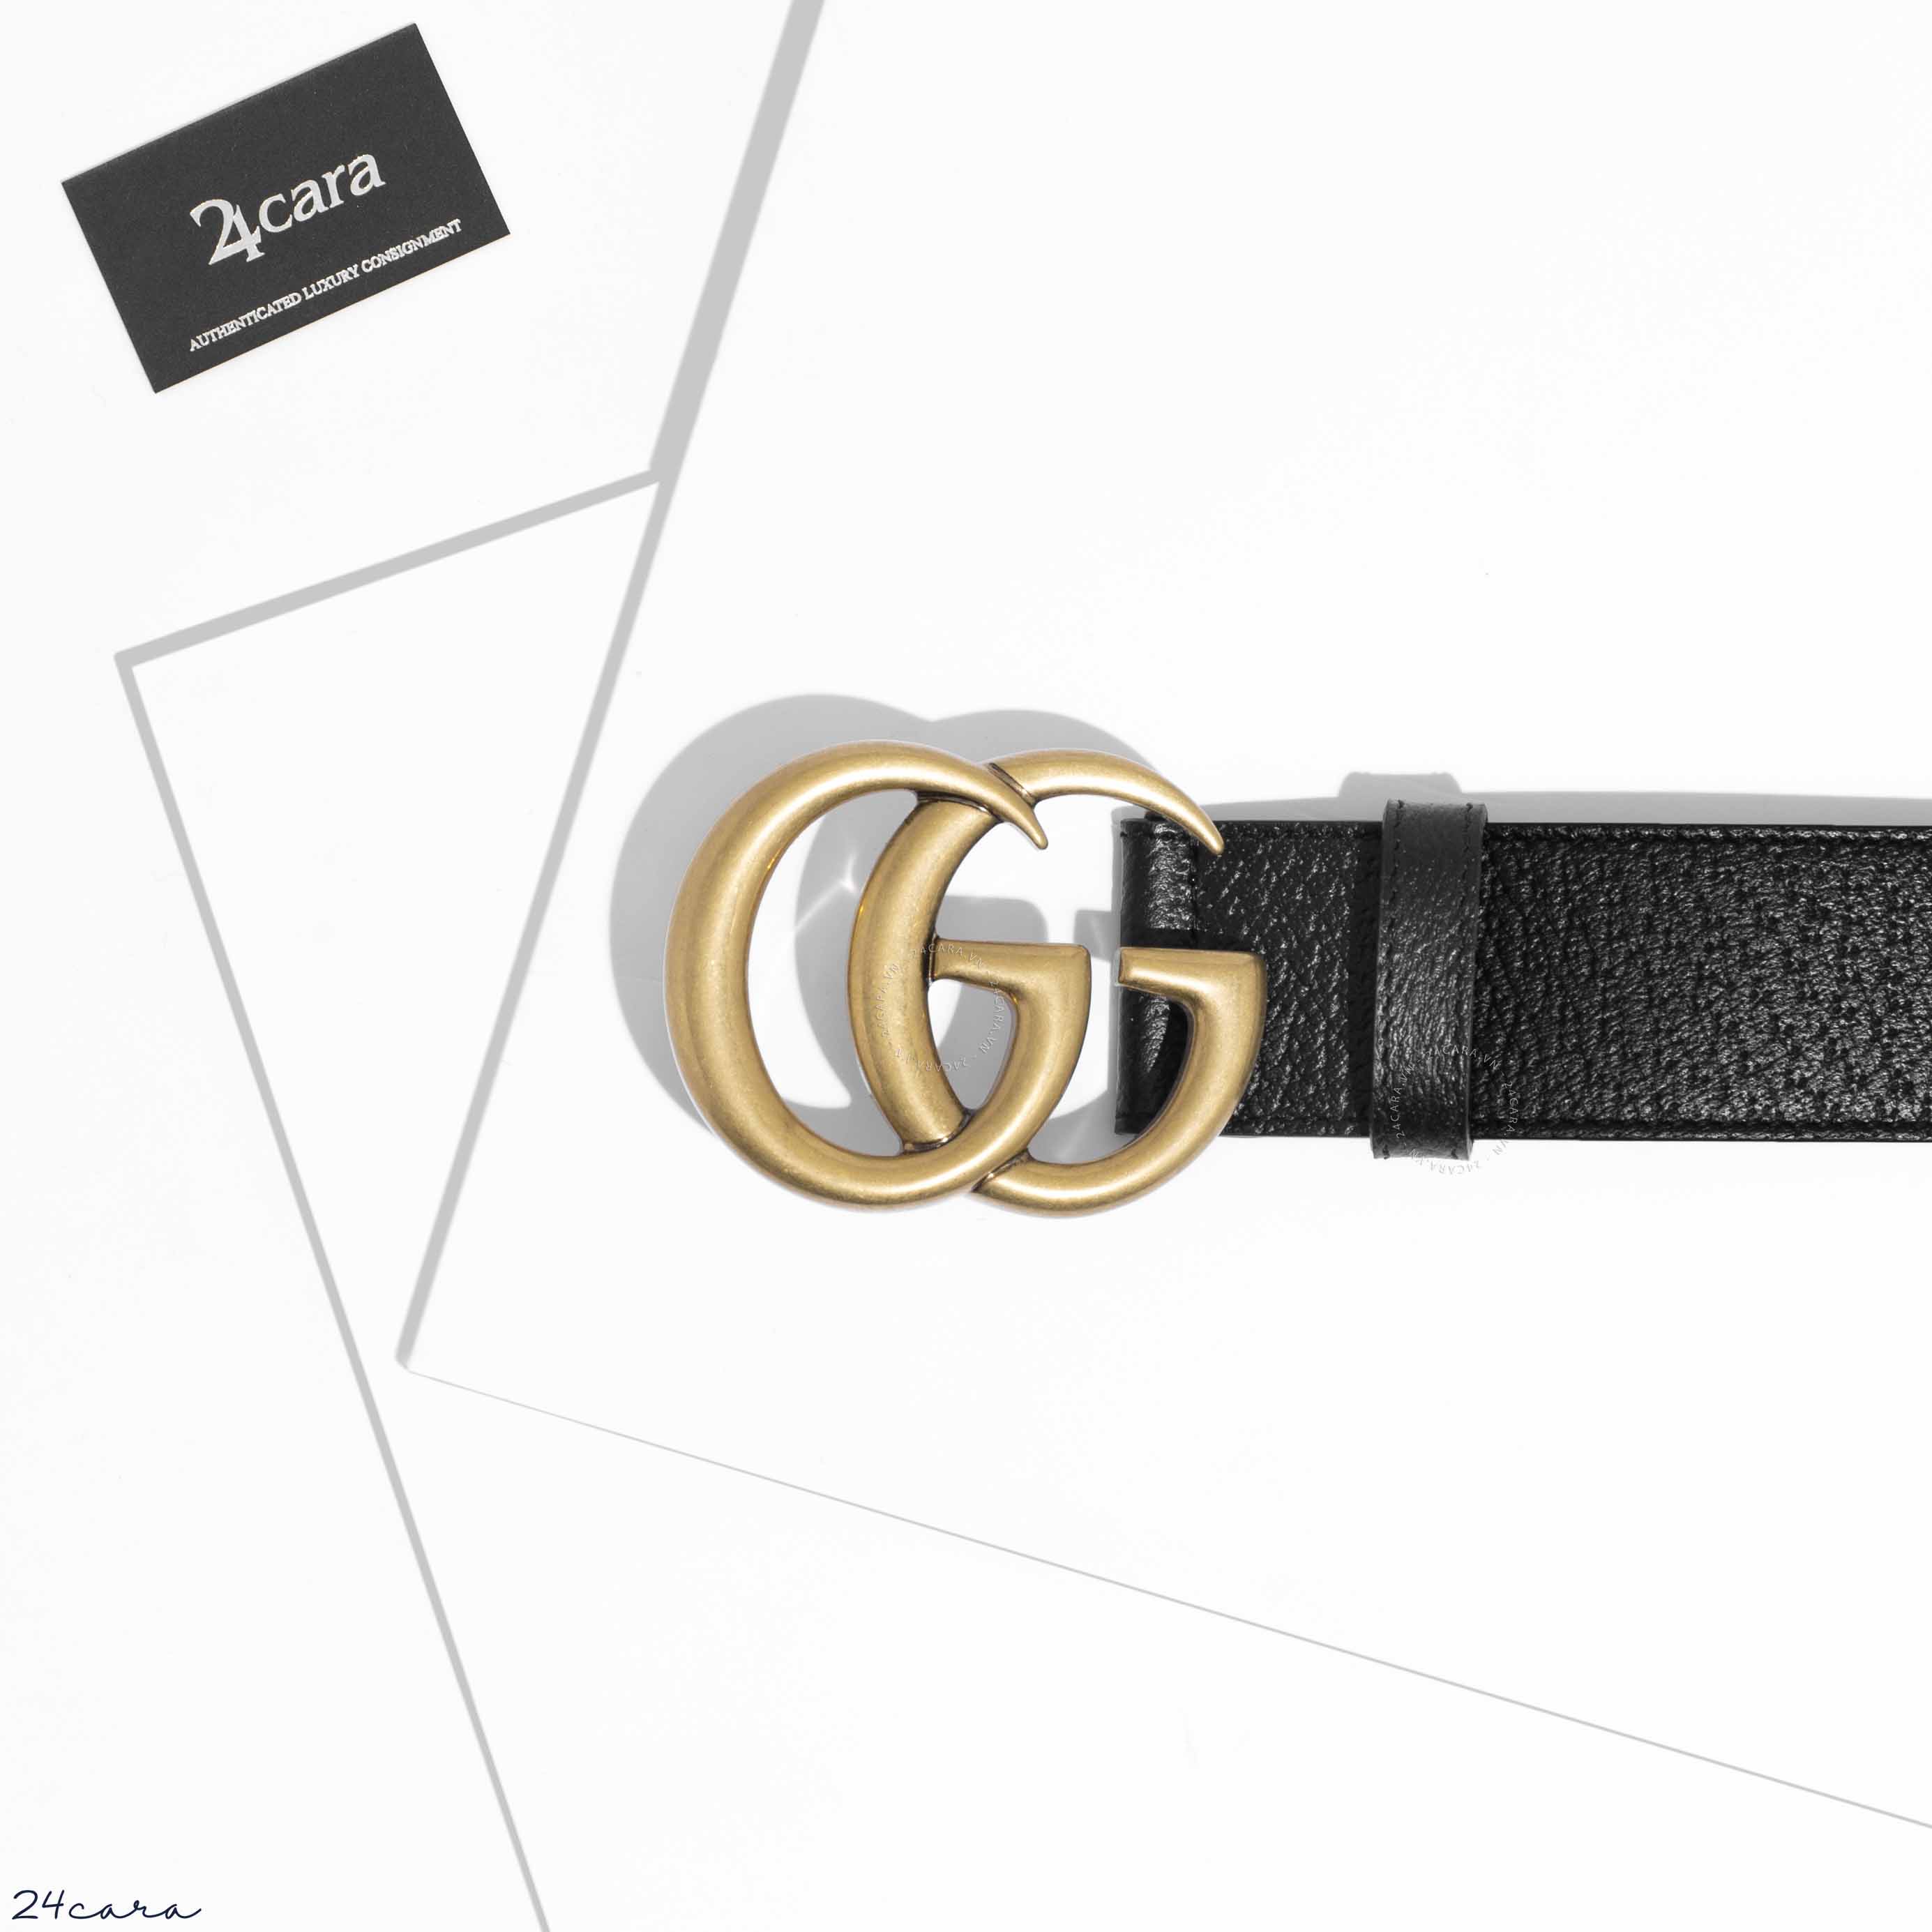 GUCCI LEATHER BELT WITH DOUBLE G BUCKLE 40MM